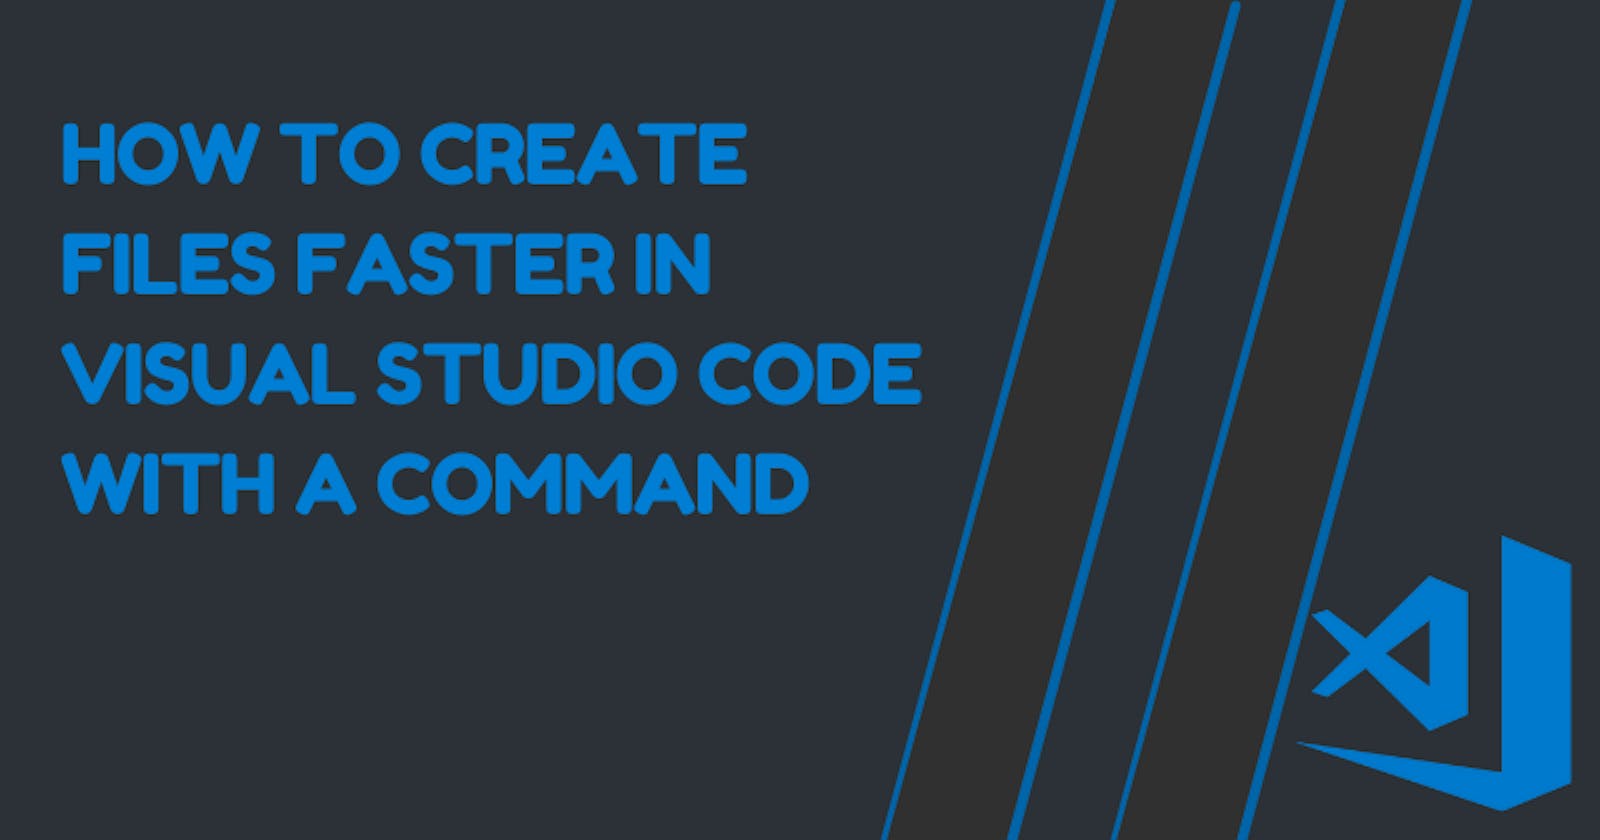 How To Create Files Faster in Visual Studio Code With a Command